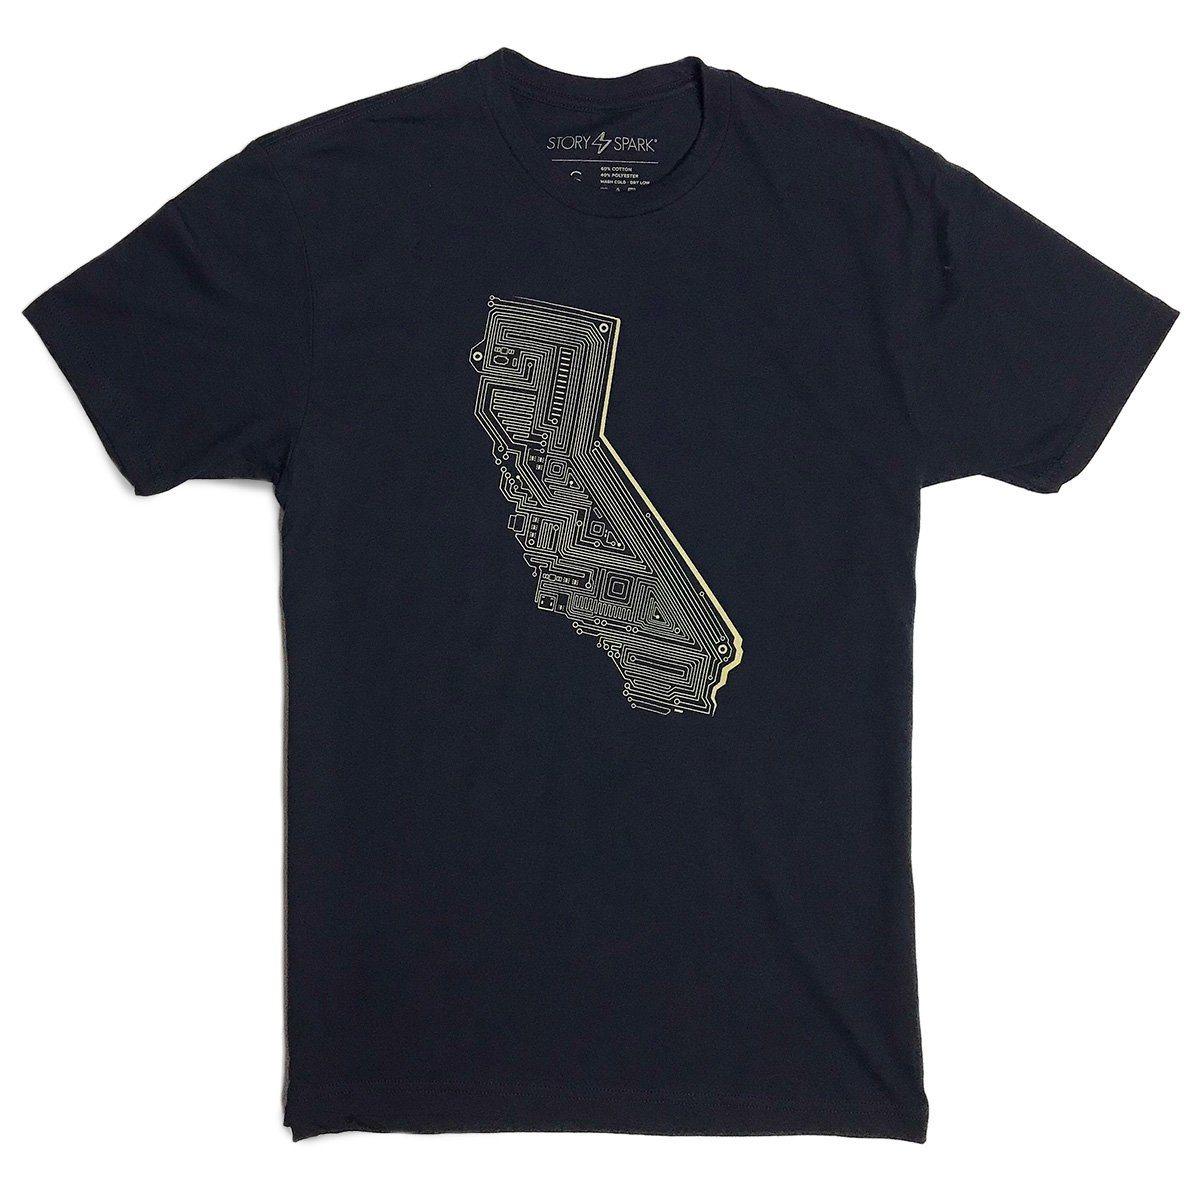 California Tech Mens Graphic T-shirt for Techs and Entrepreneurs STORY SPARK